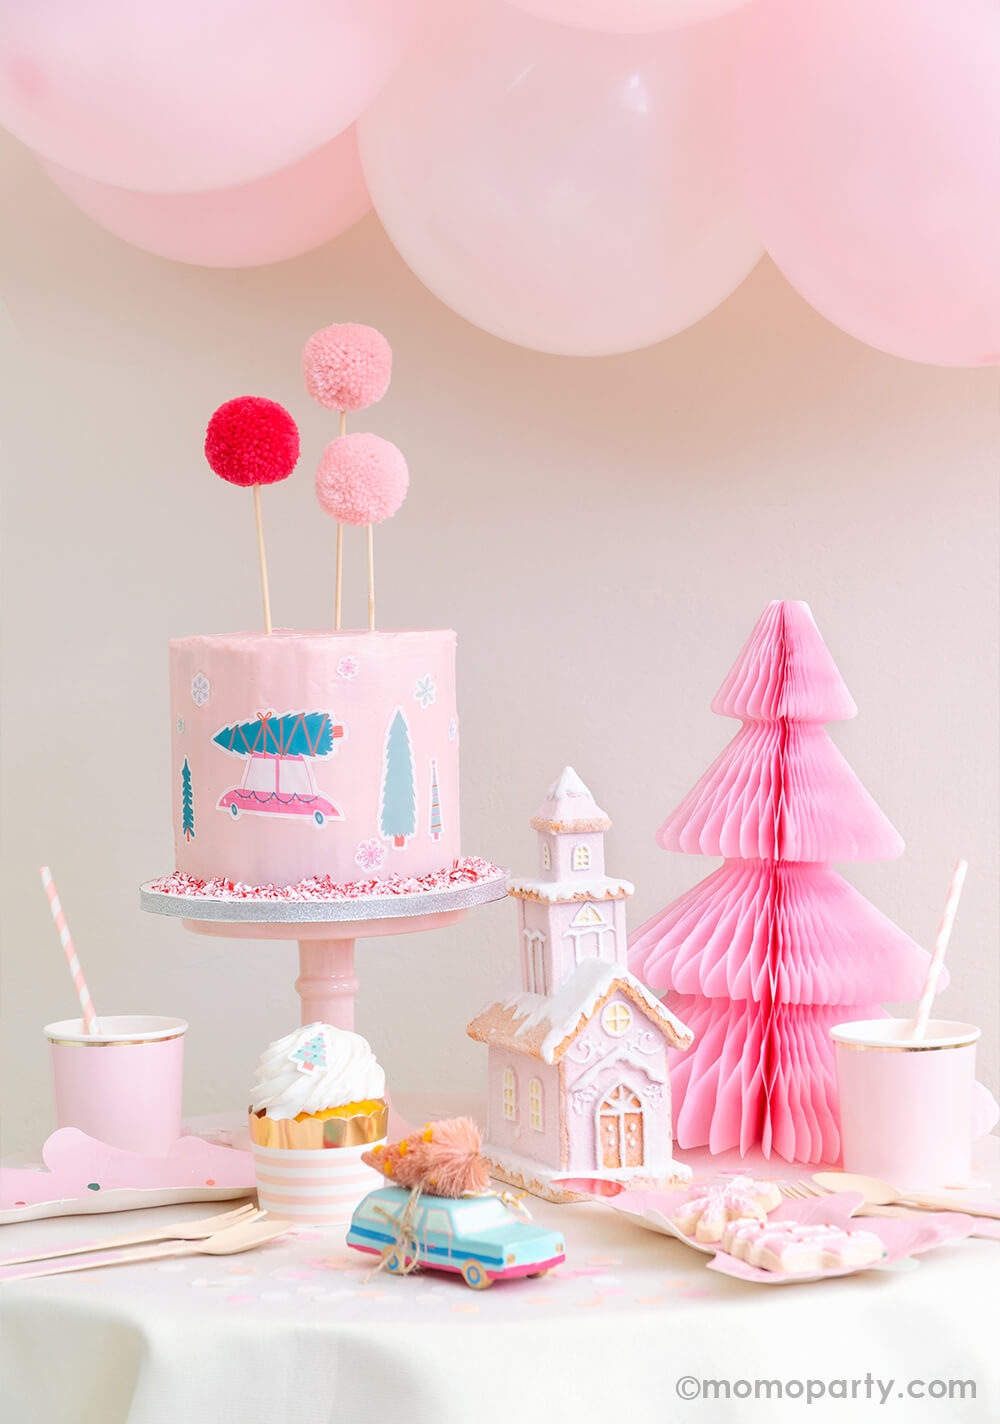 Momo-Party-Holiday Set up with Pastel pink buttercream cake decorated with Let's Get A Tree! Cakescape Edible Stickers of christmas tree on a truck, snowflakes stickers. Cake By Courtney Pom Pom Cake Toppers, Light Pink Honeycomb Paper Christmas Tree, a snow pink house decoration, pastel mint car carry a pink tree ornament, cupcake in the Blush Striped Food Cup, fa la la tree plates on the table for a modern cute sweet cozy look holiday celebration 